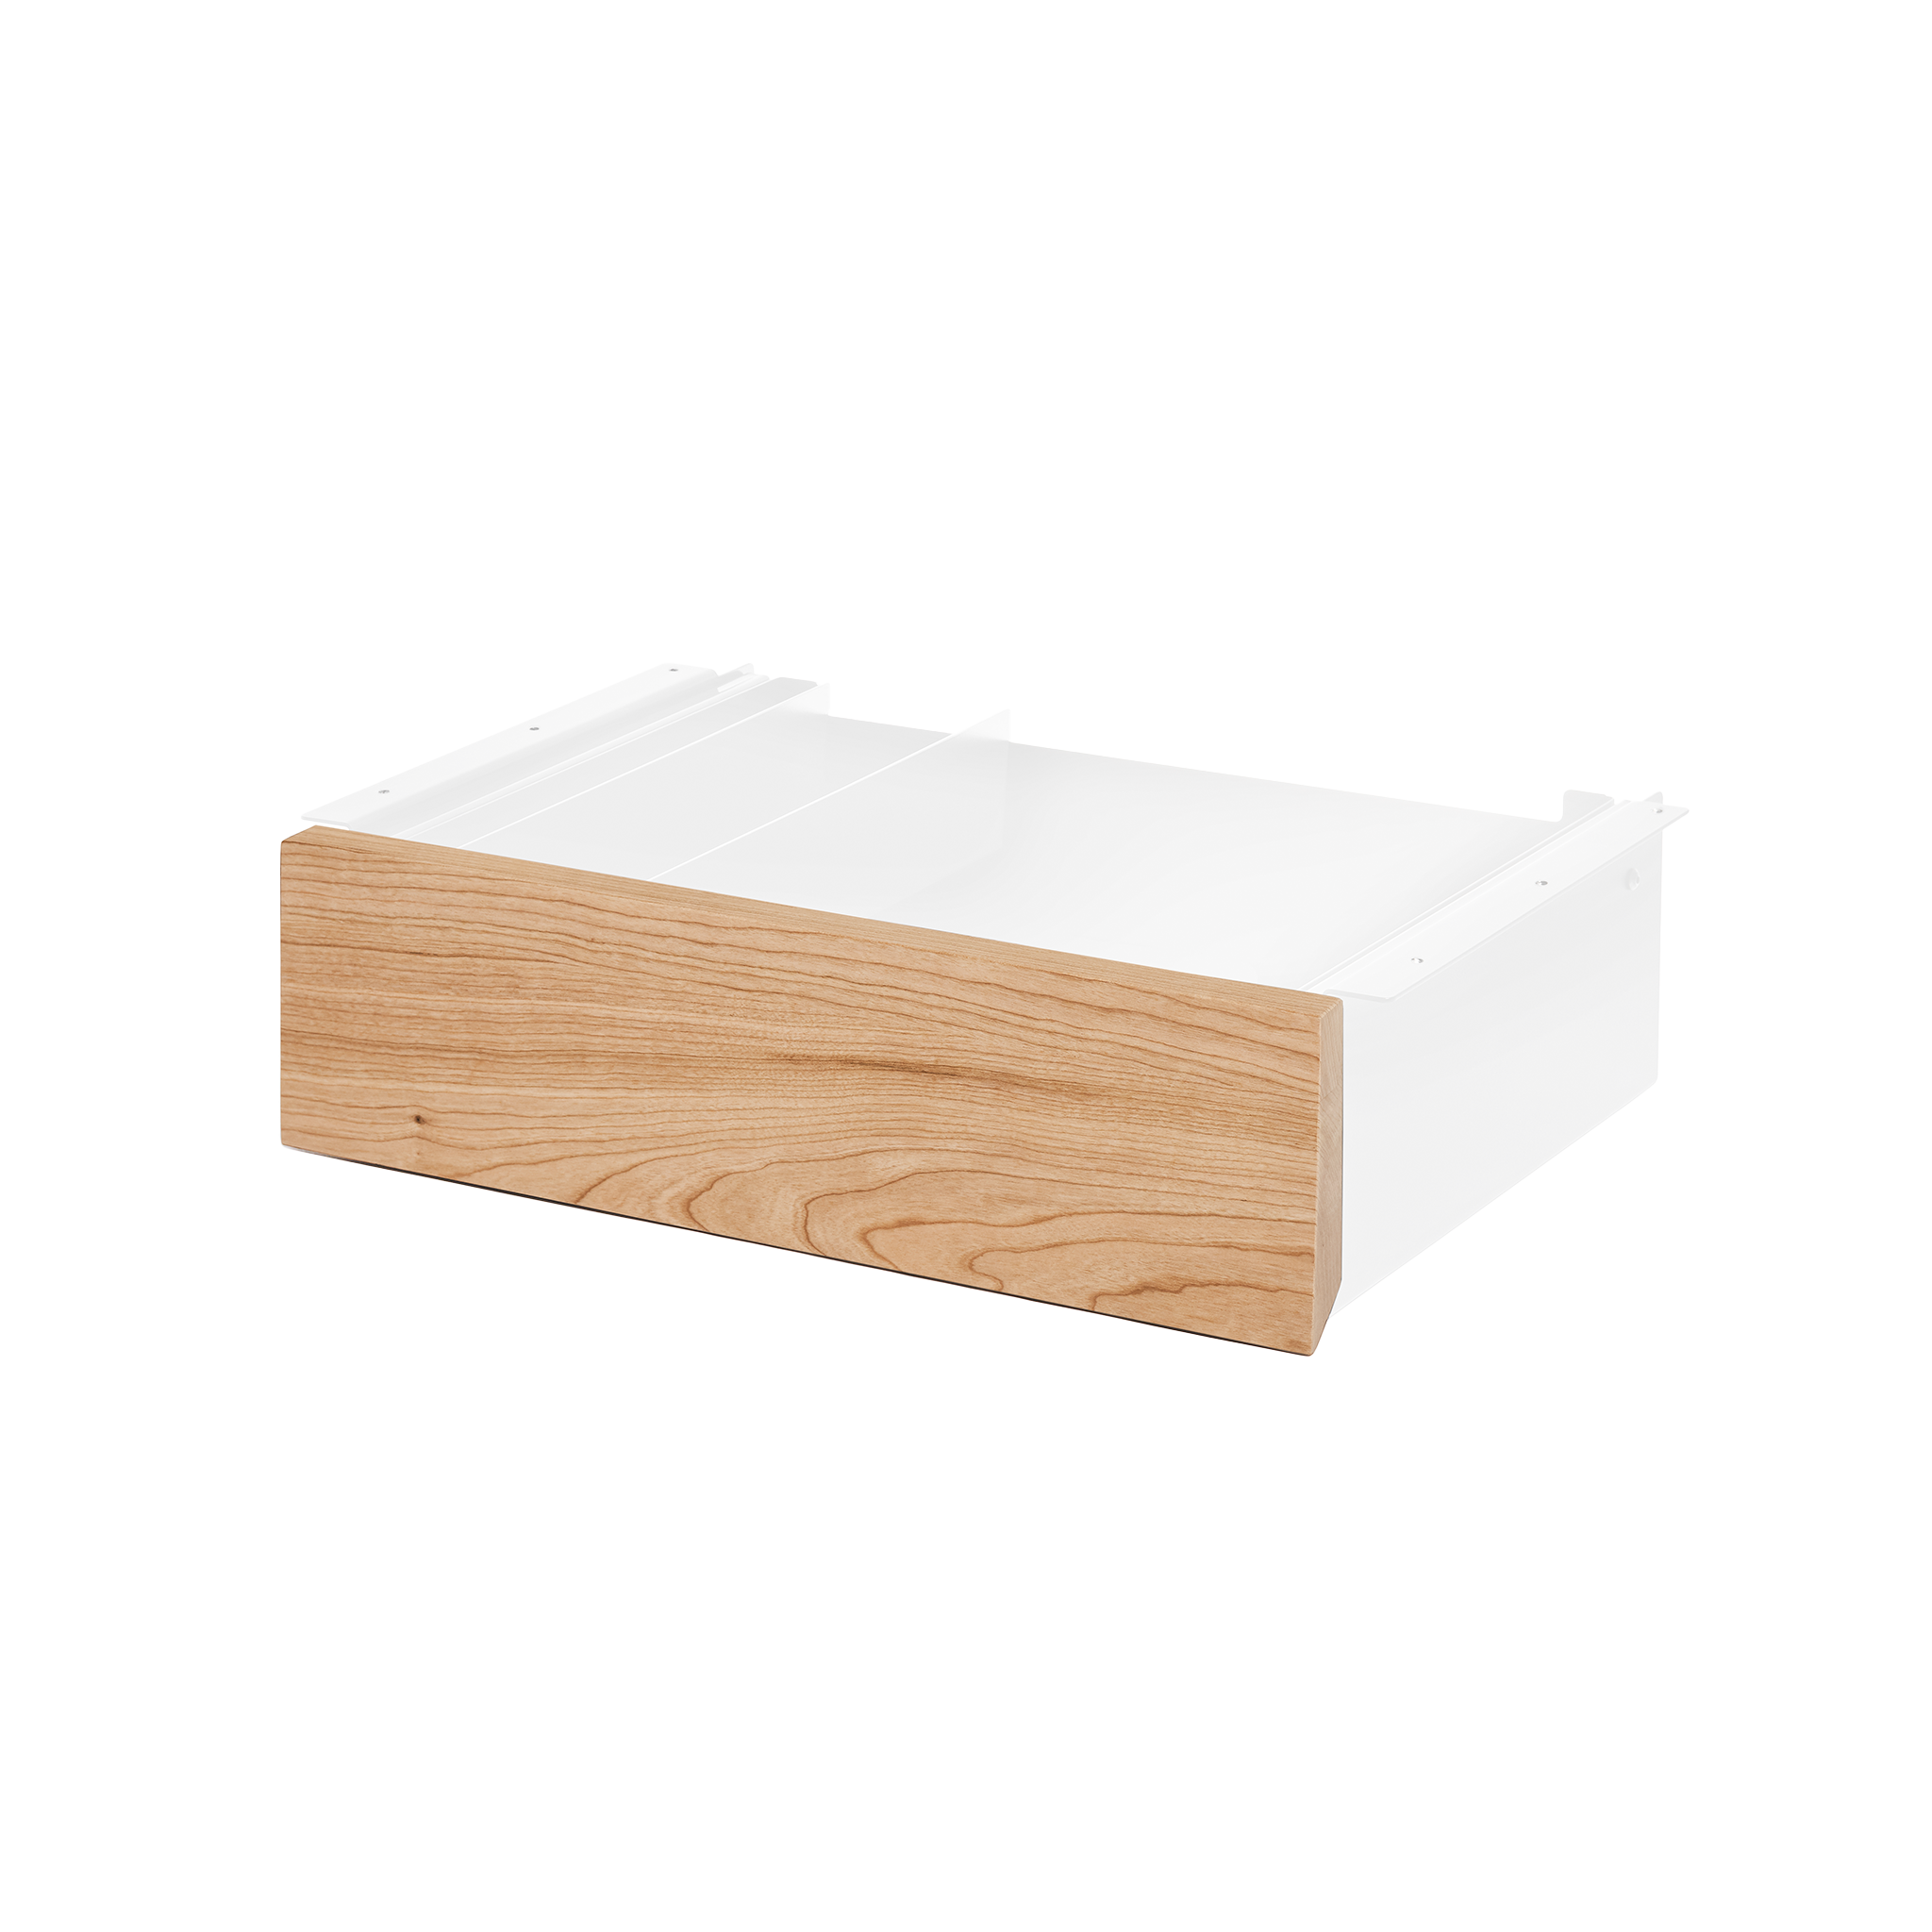 Almost Perfect Drawer - White-Cherrywood - Blanc-Cerisier